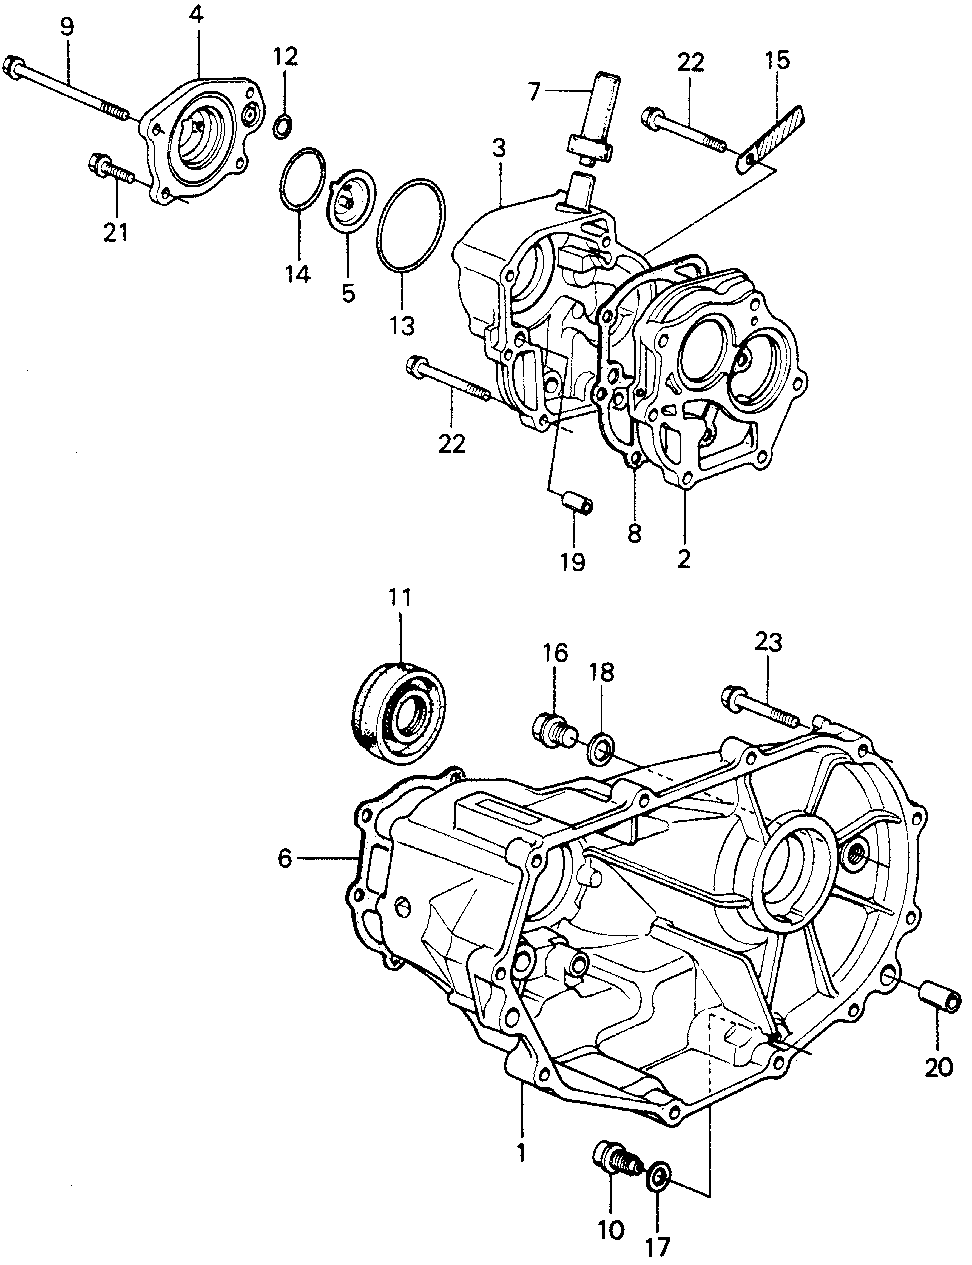 21310-PA0-960 - COVER, TRANSMISSION